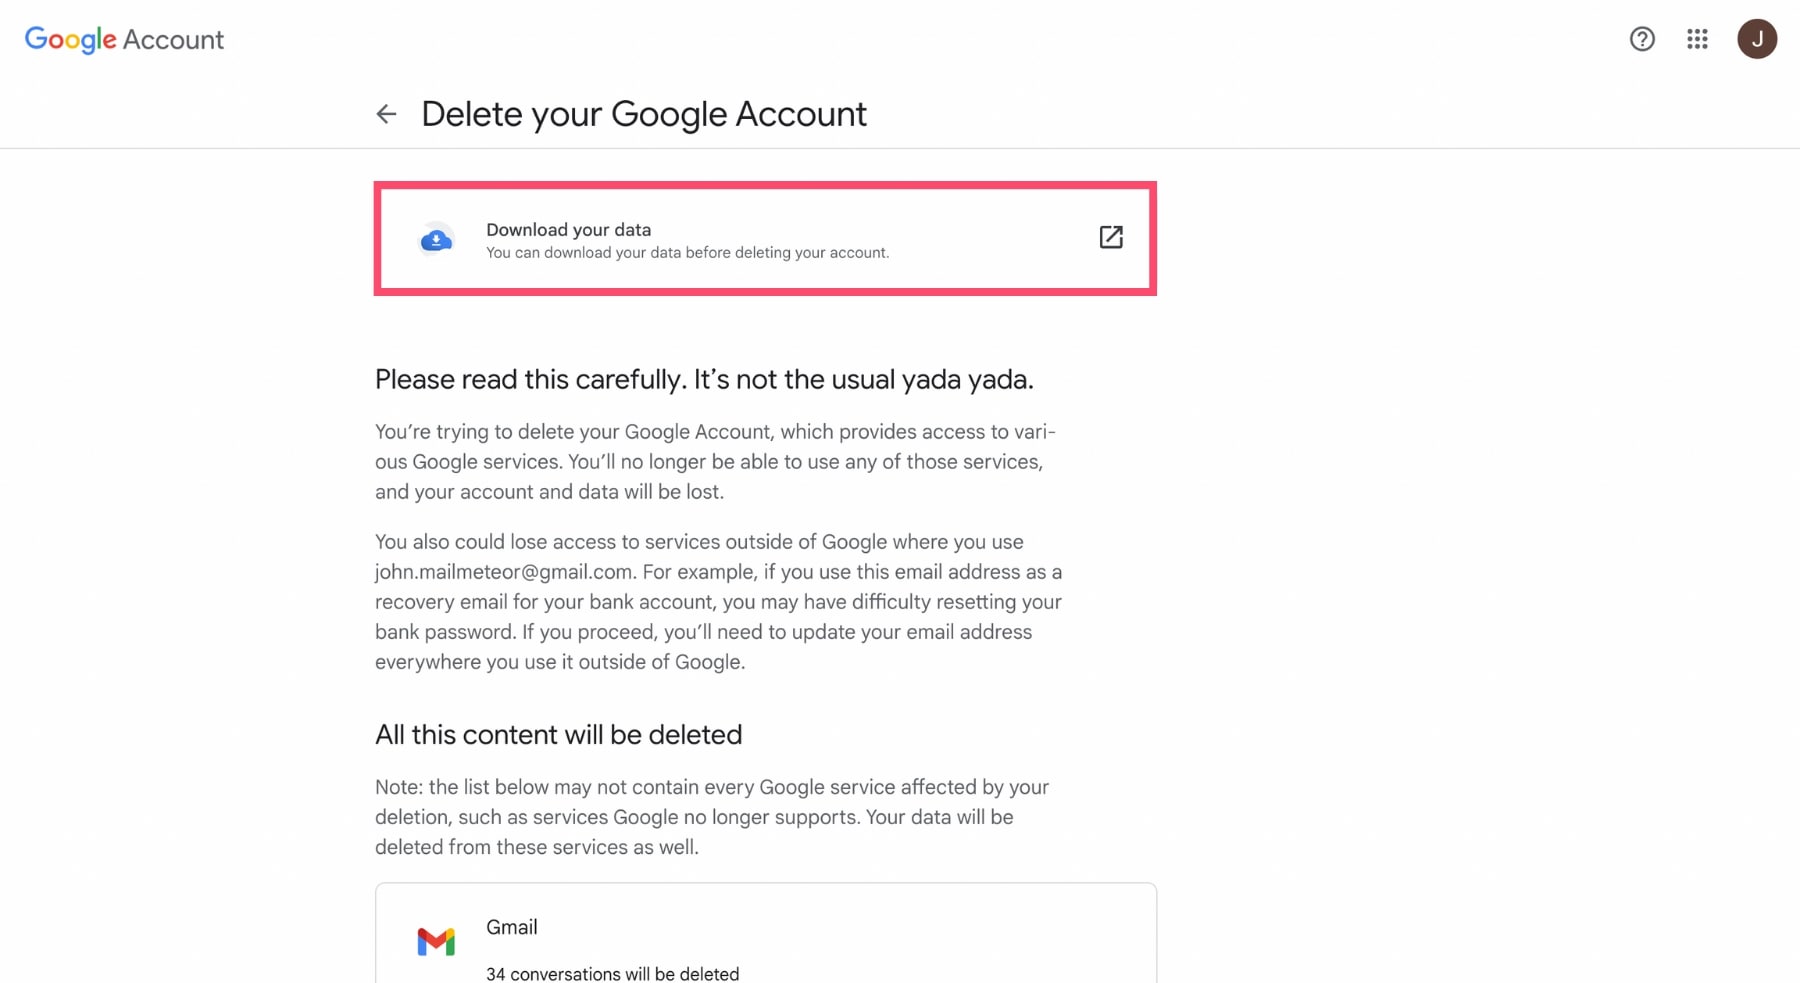 Download the data of your Google account